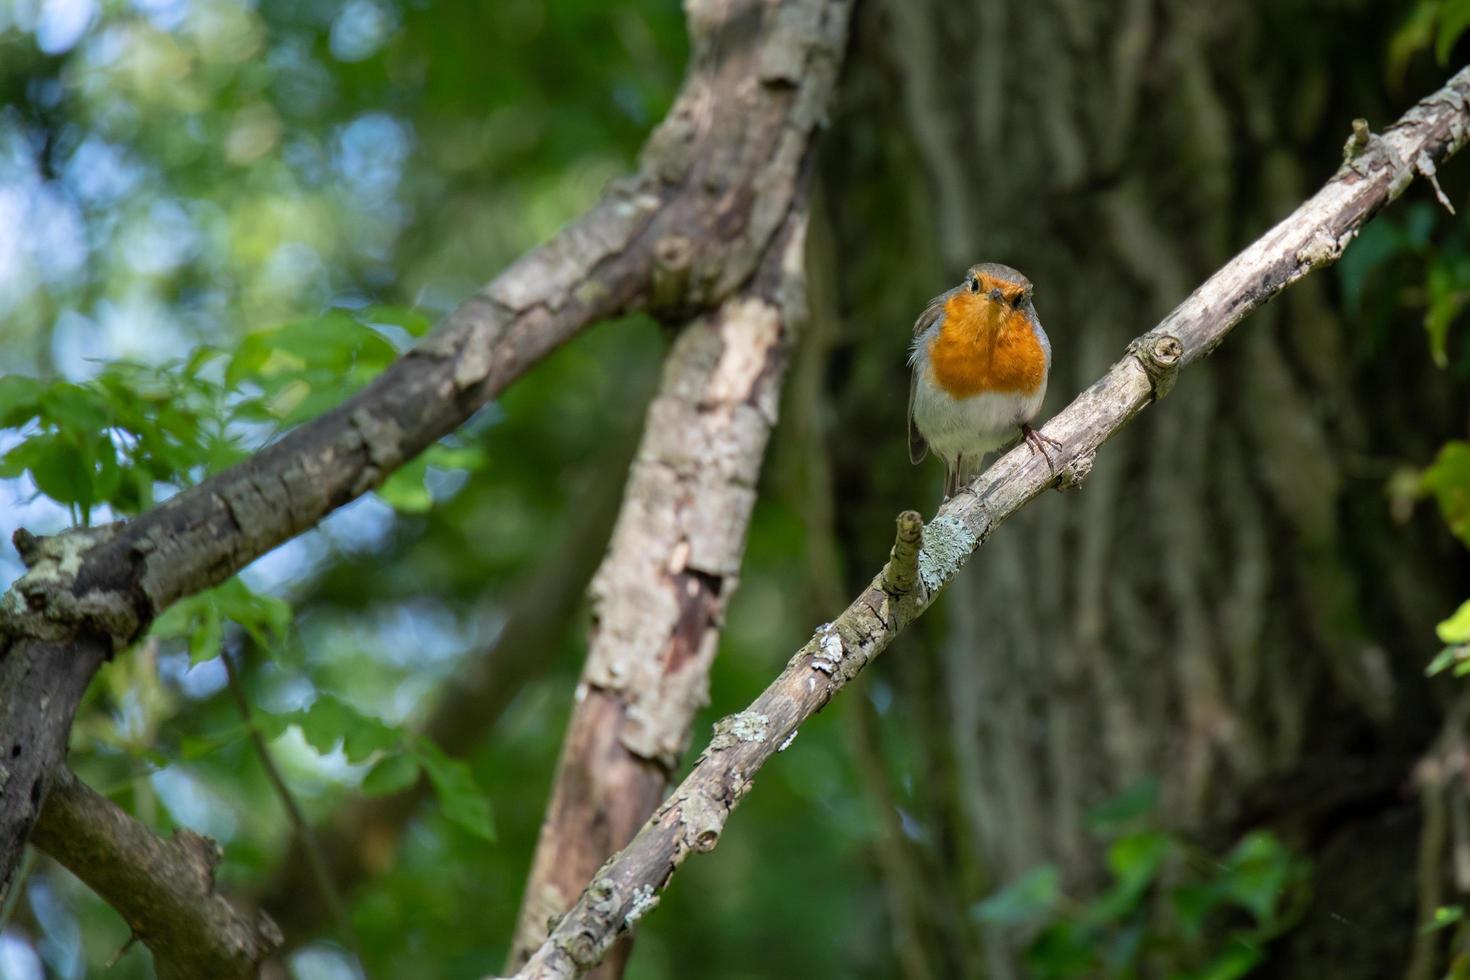 Robin singing in a tree on a spring day photo